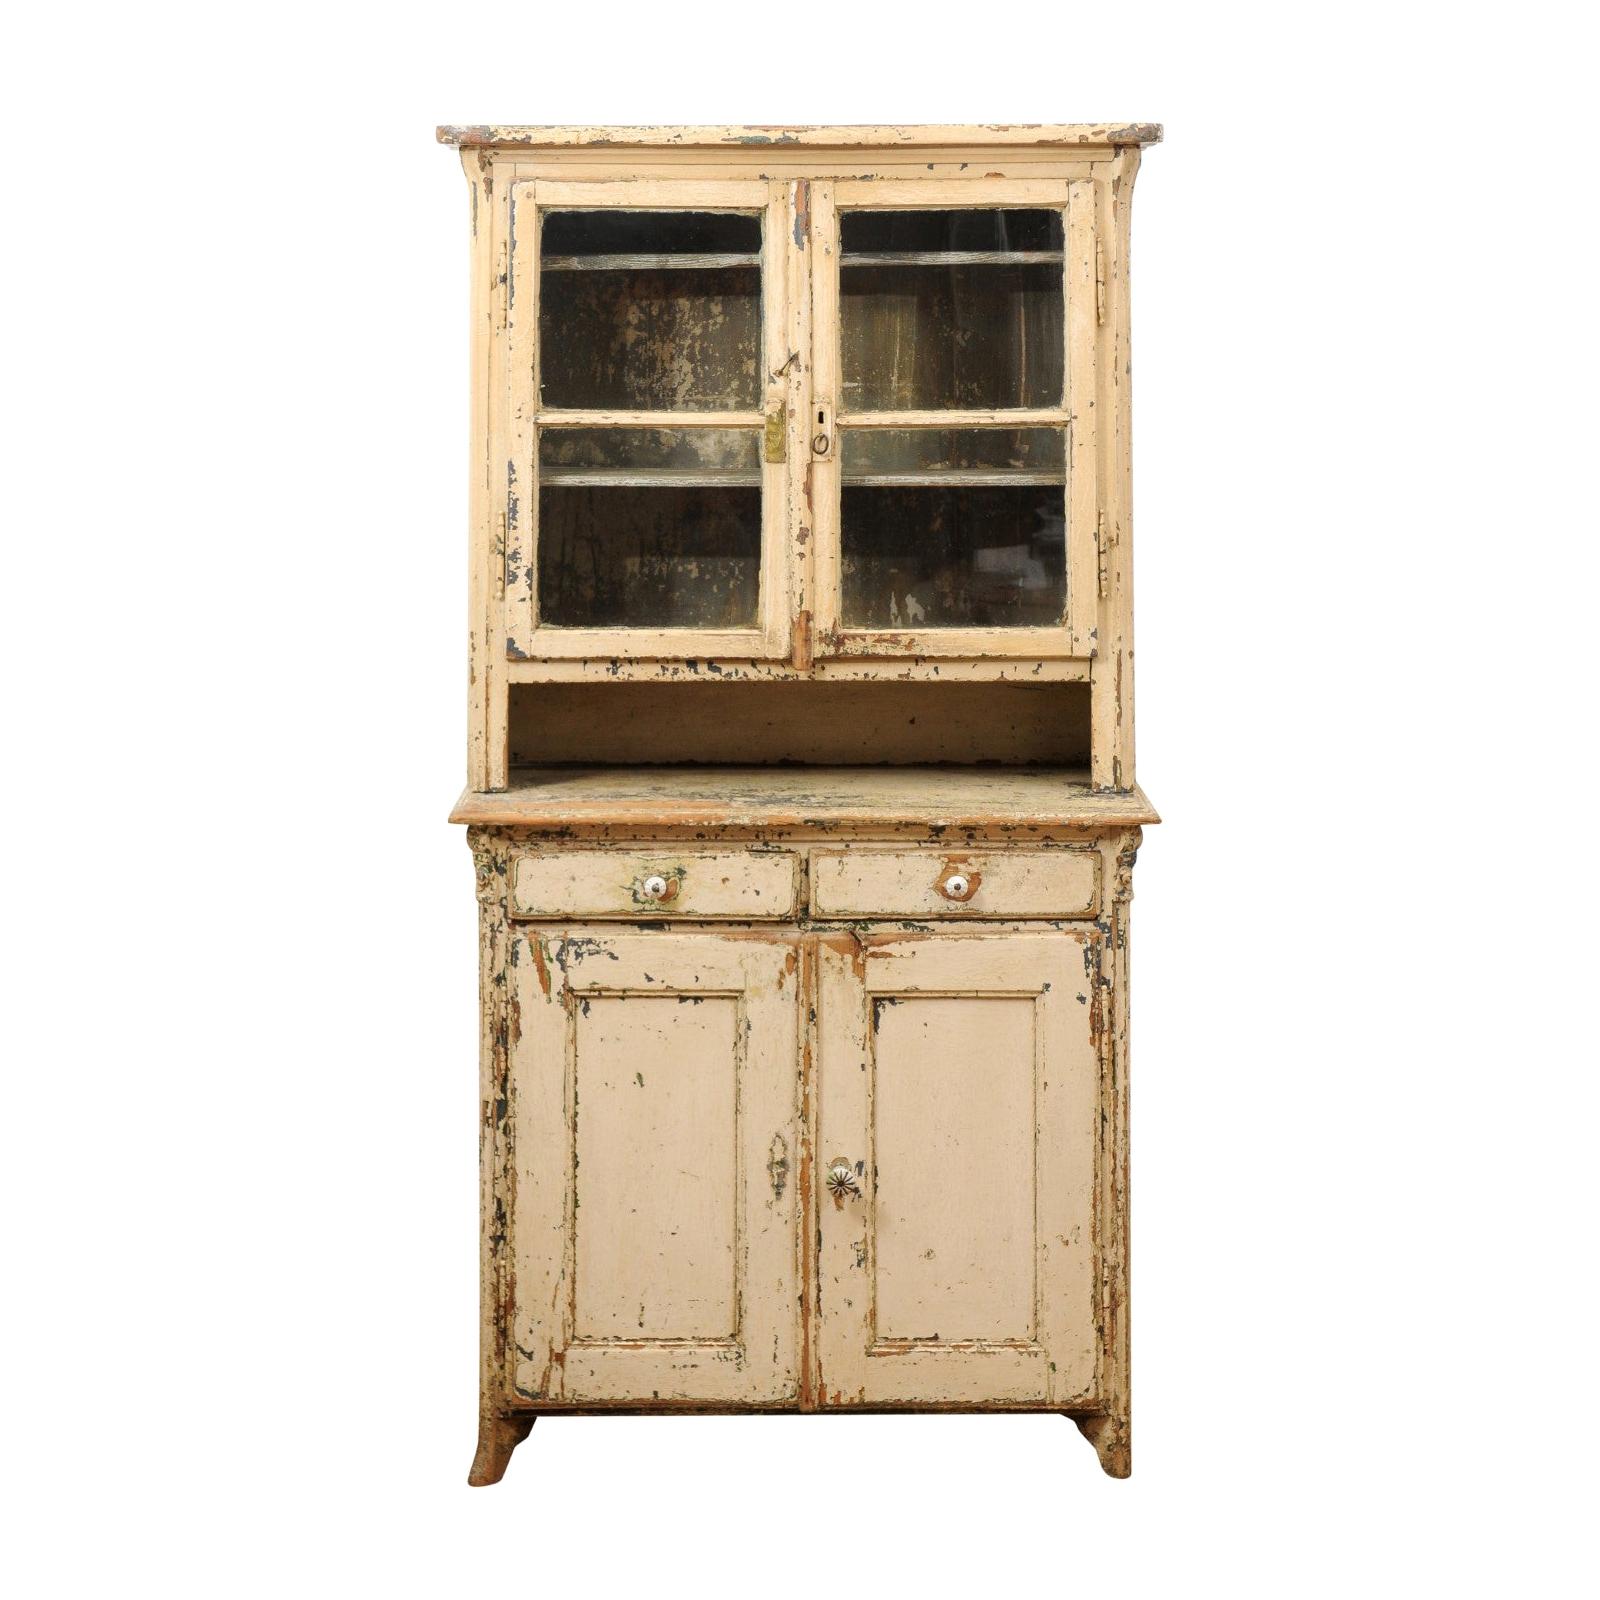 19th Century American Rustic Cabinet with Glass Doors and Distressed Finish